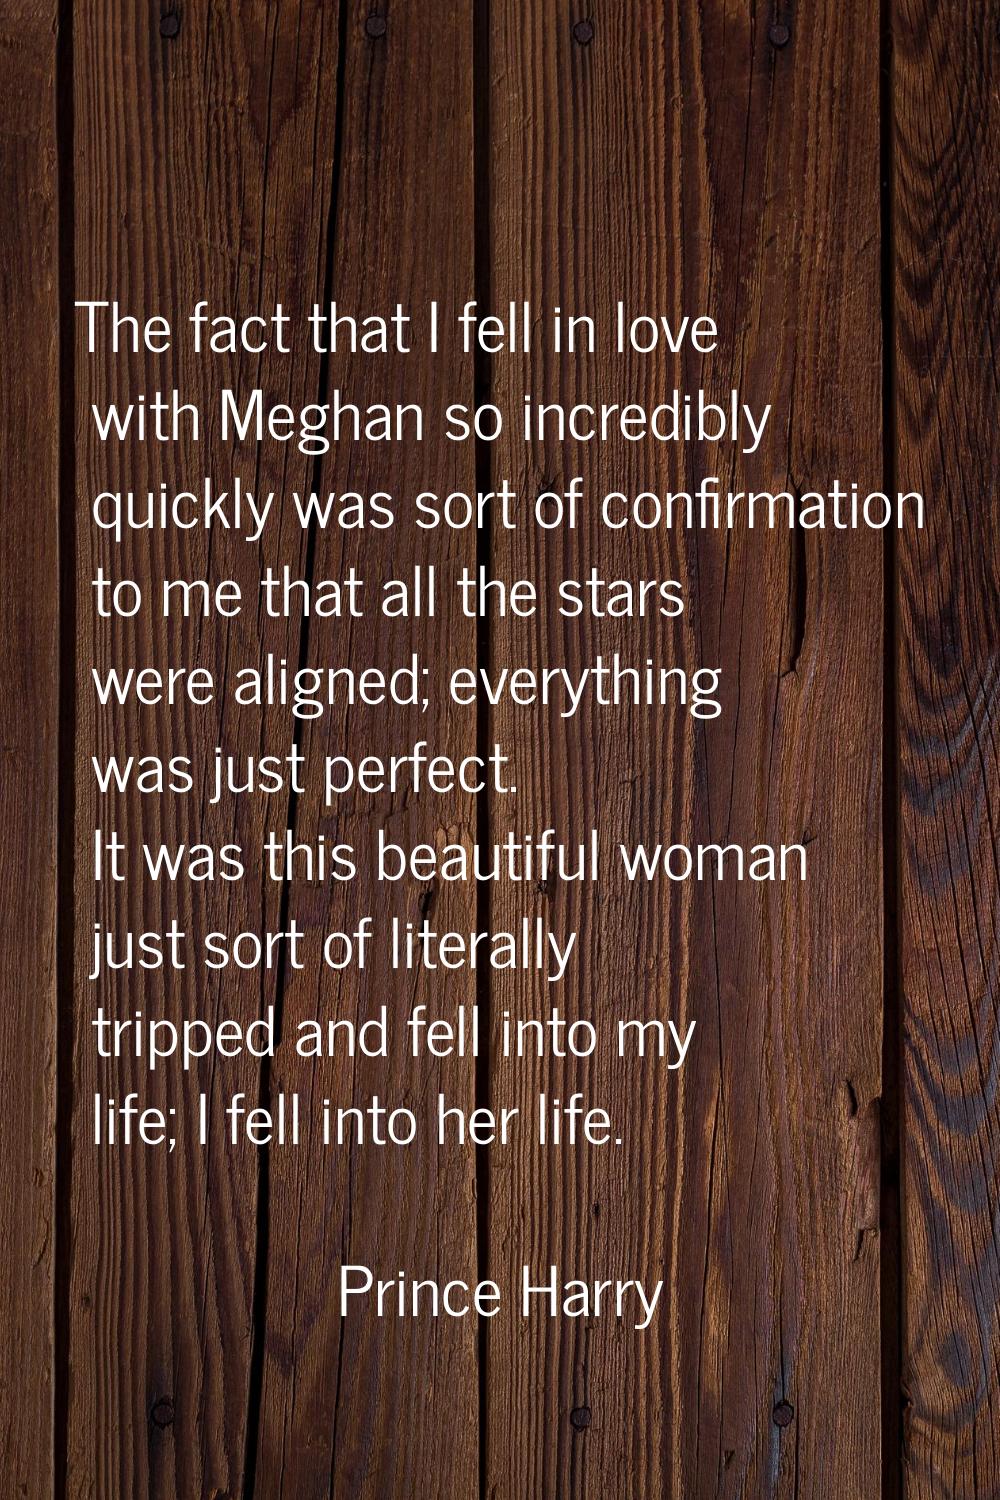 The fact that I fell in love with Meghan so incredibly quickly was sort of confirmation to me that 